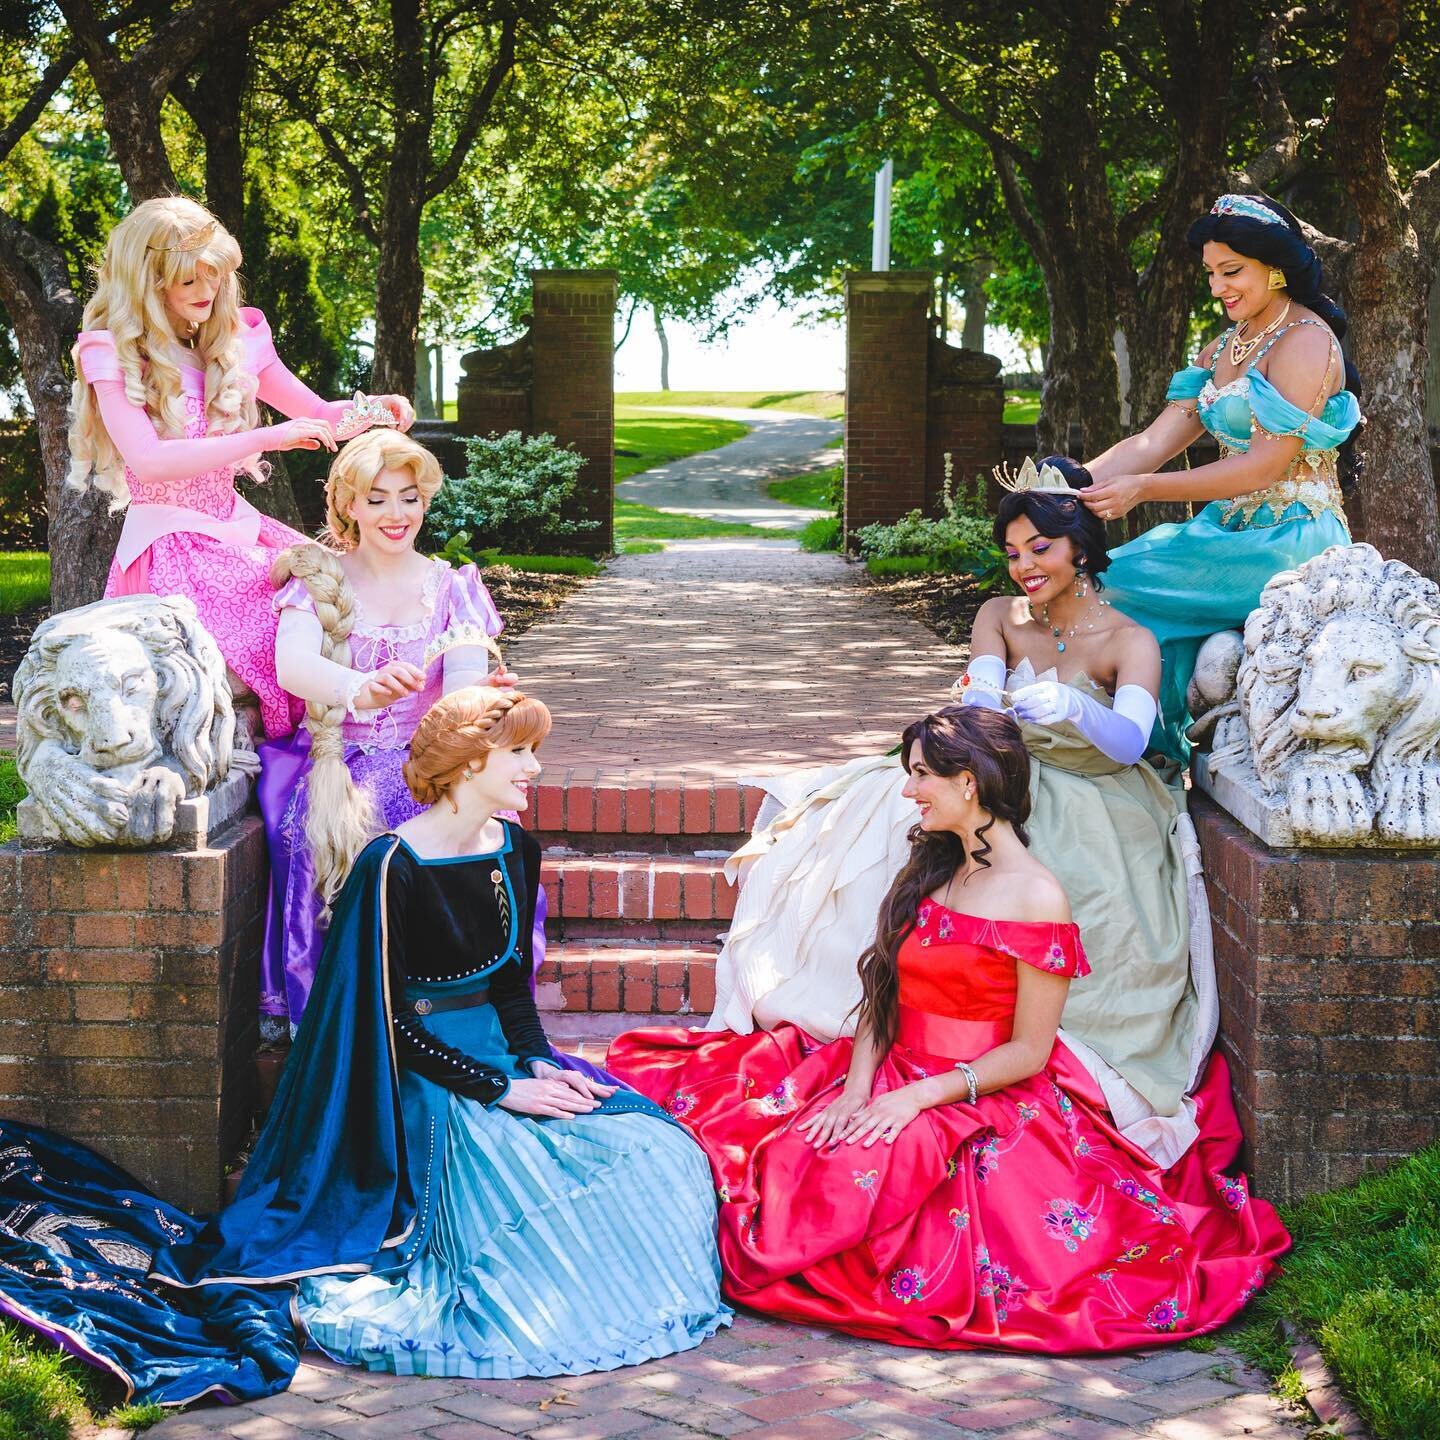 Real Queens fix each other's crowns! 
✨👑✨
Our princesses love to attend parties together! Book any combination of characters that your heart desires at www.sparkadreamprincessparties.com! 
.
.
📸: @jennplantography 
.
.
.
.
.
.
.
.
.
.
.
.
.
.

#Dan